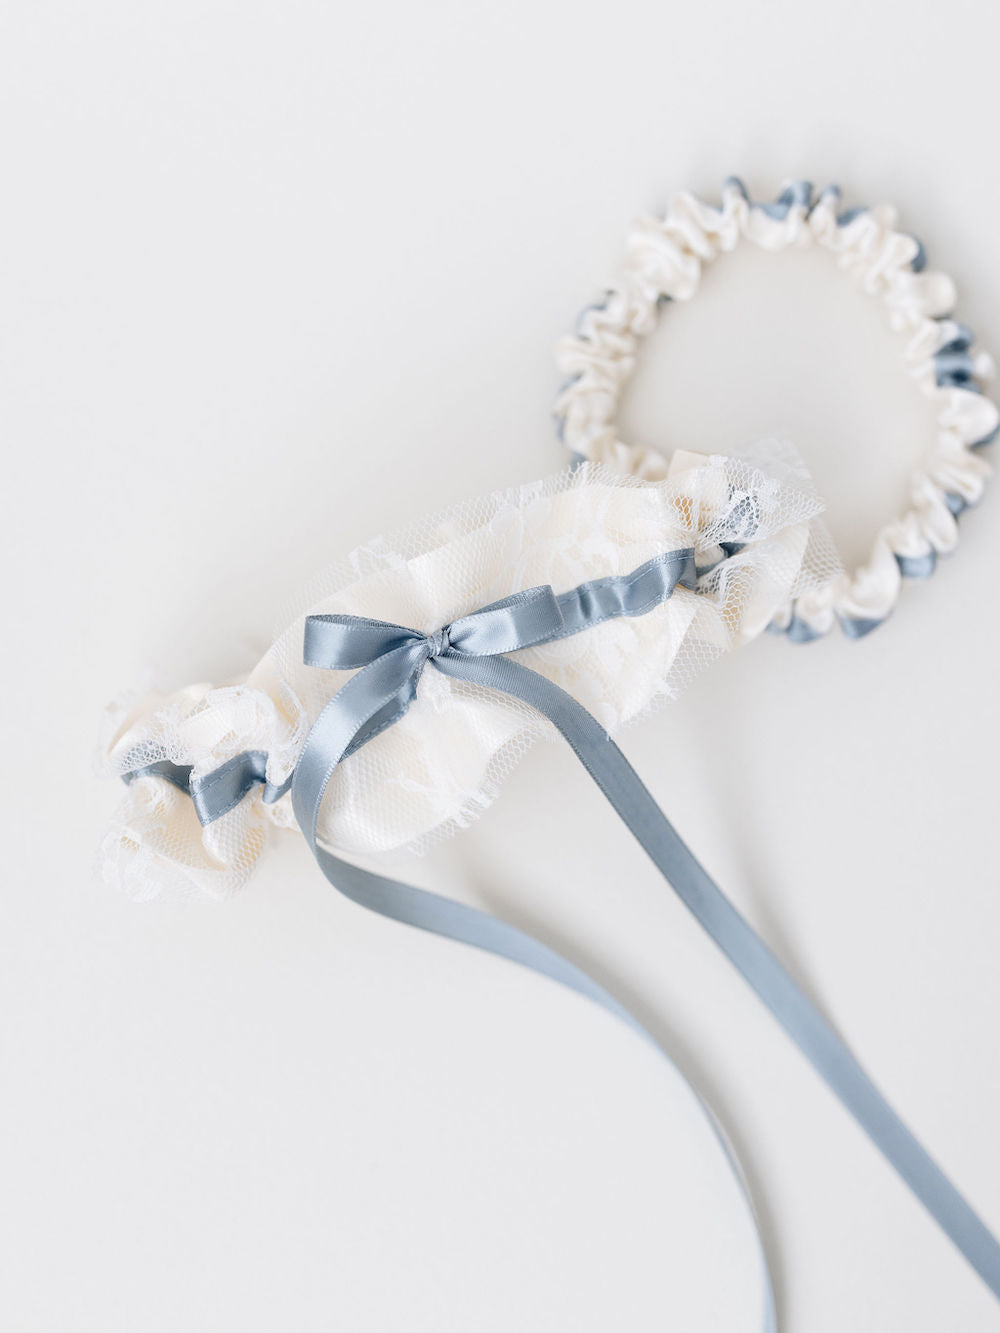 wedding garter set handmade with something blue detailing and ivory satin and lace by The Garter Girl